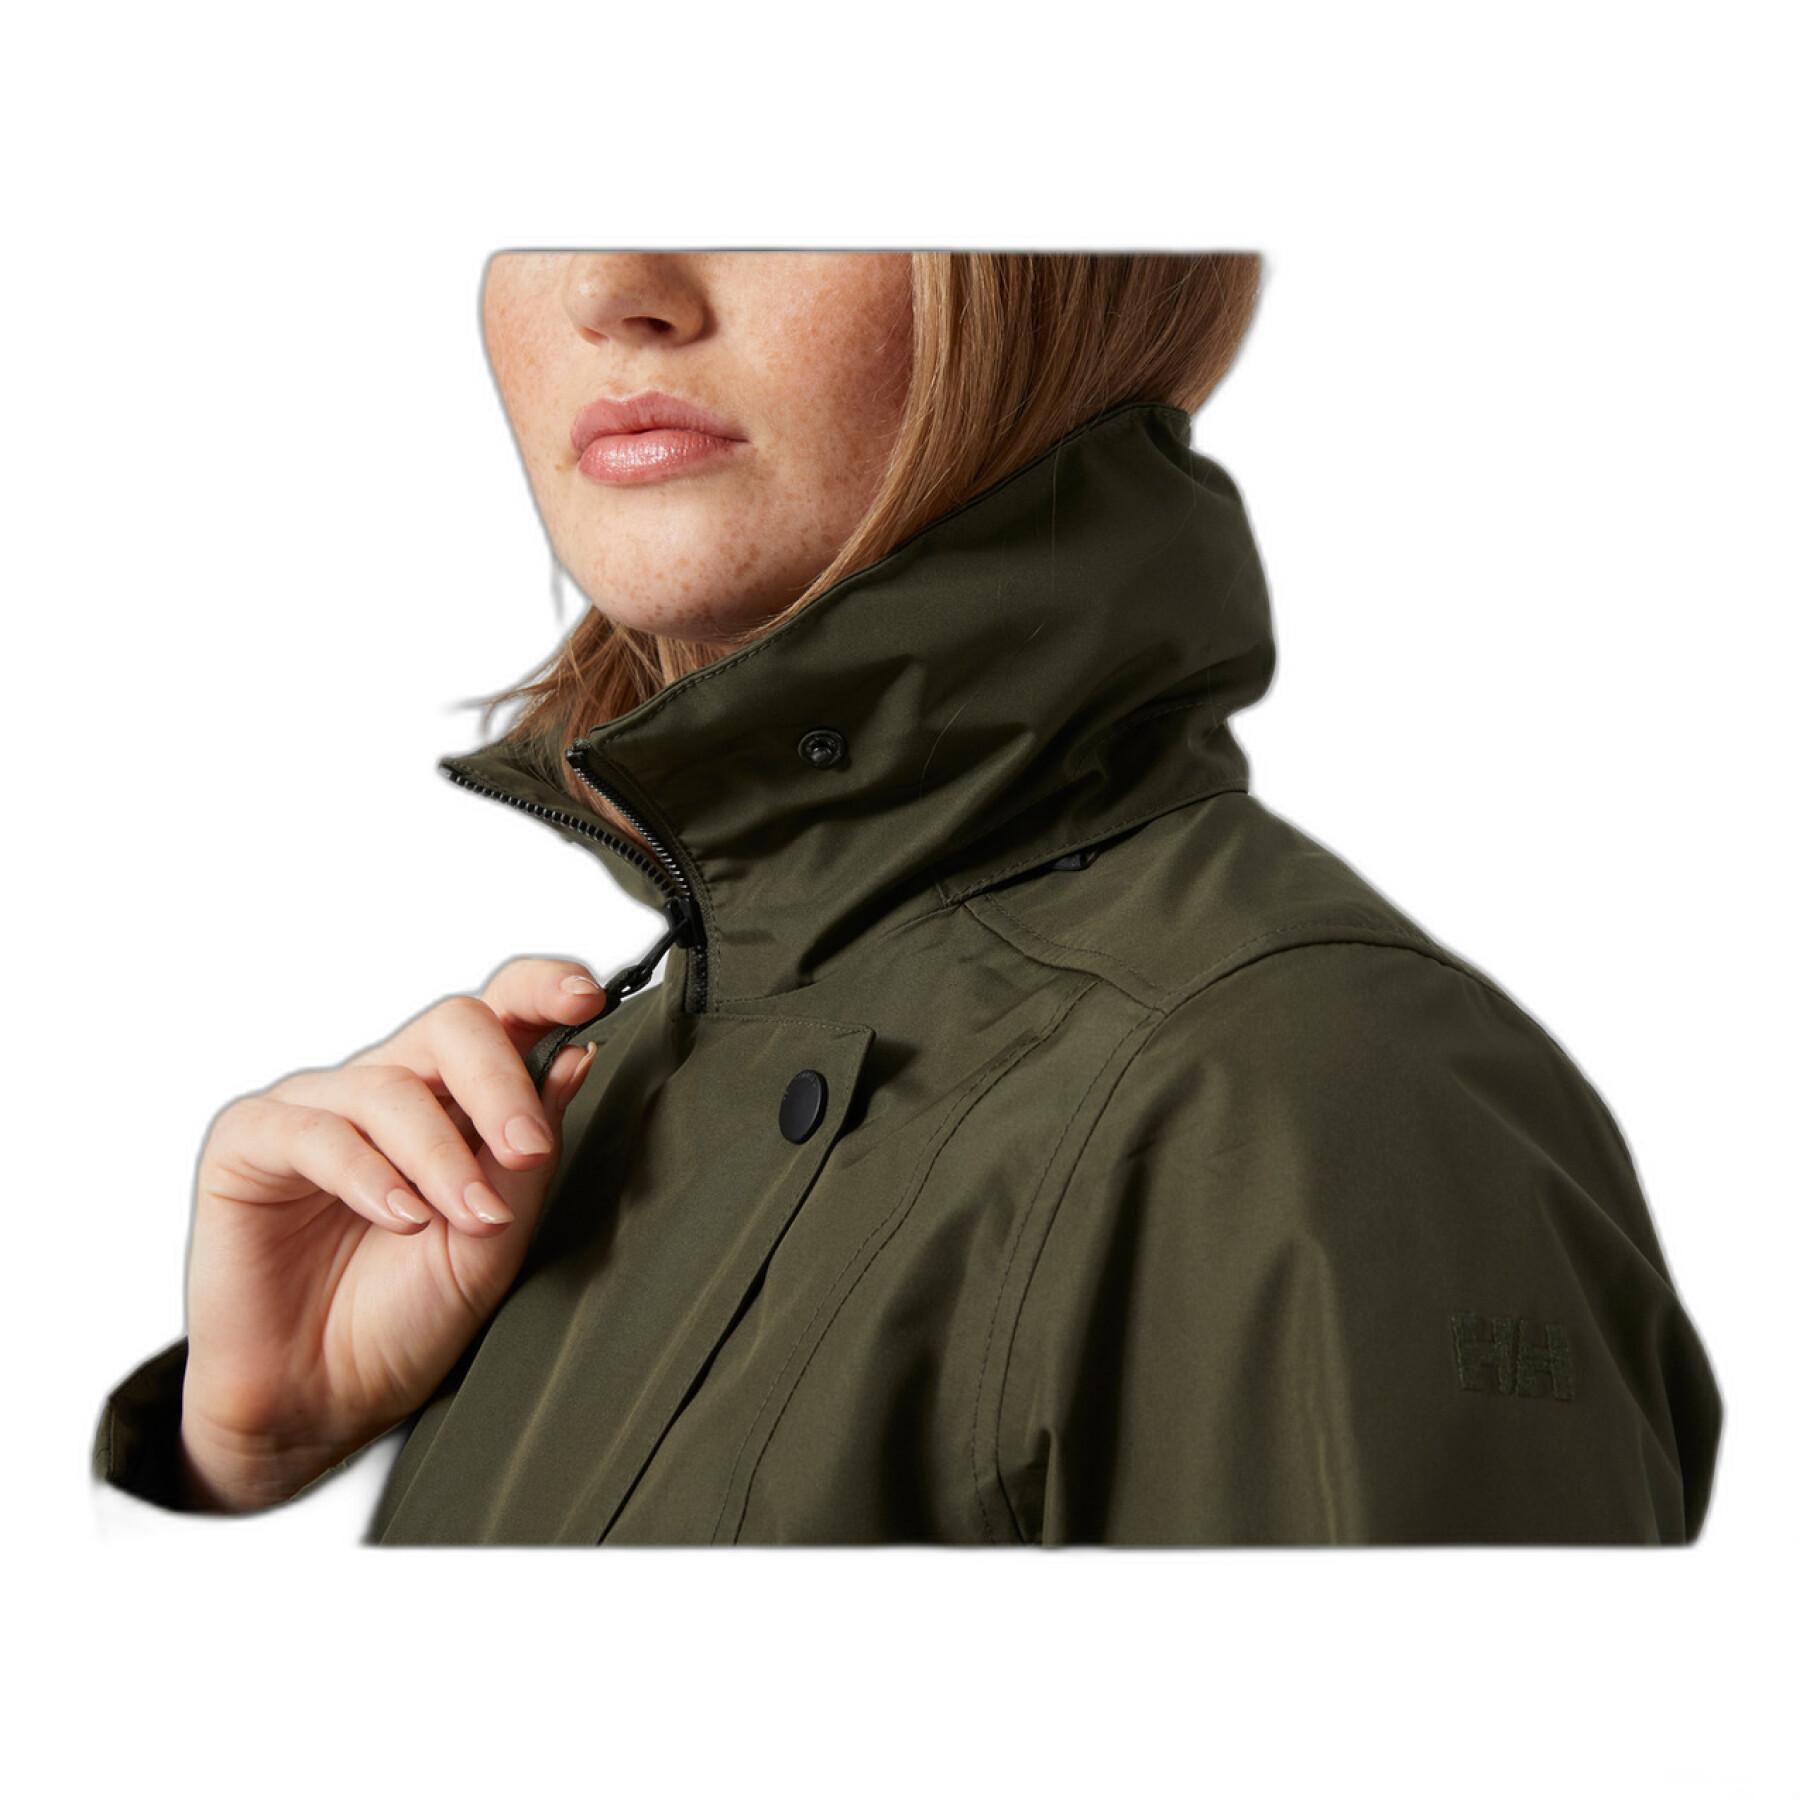 Giacca impermeabile da donna Helly Hansen welsey II trench